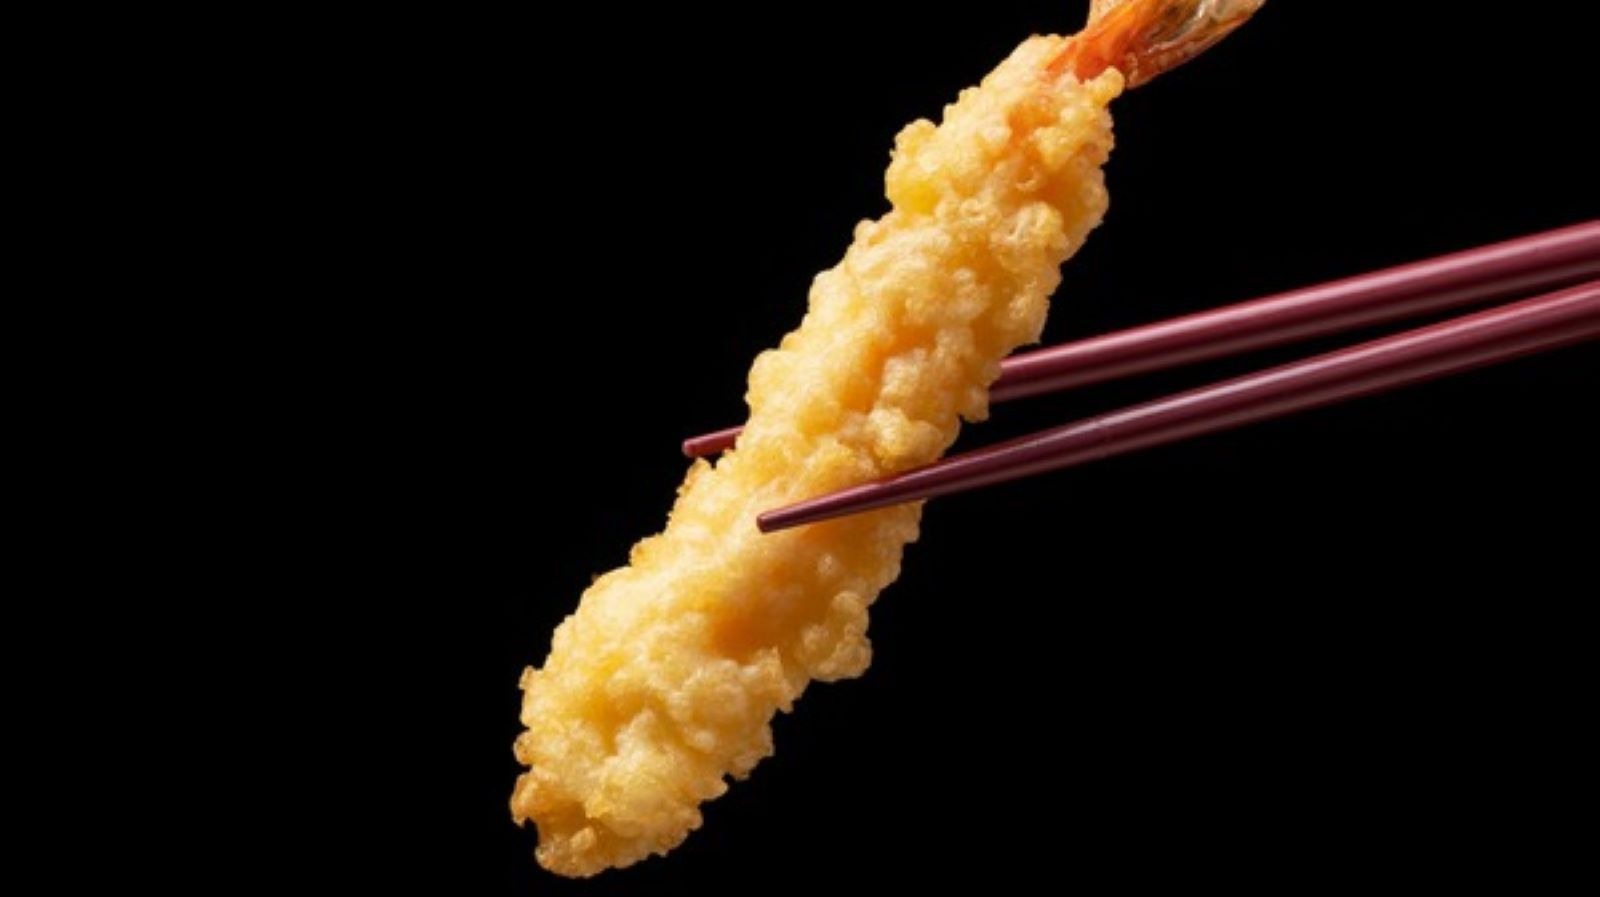 https://www.mashed.com/img/gallery/how-to-use-a-chopstick-to-make-perfectly-fried-food/l-intro-1655480503.jpg